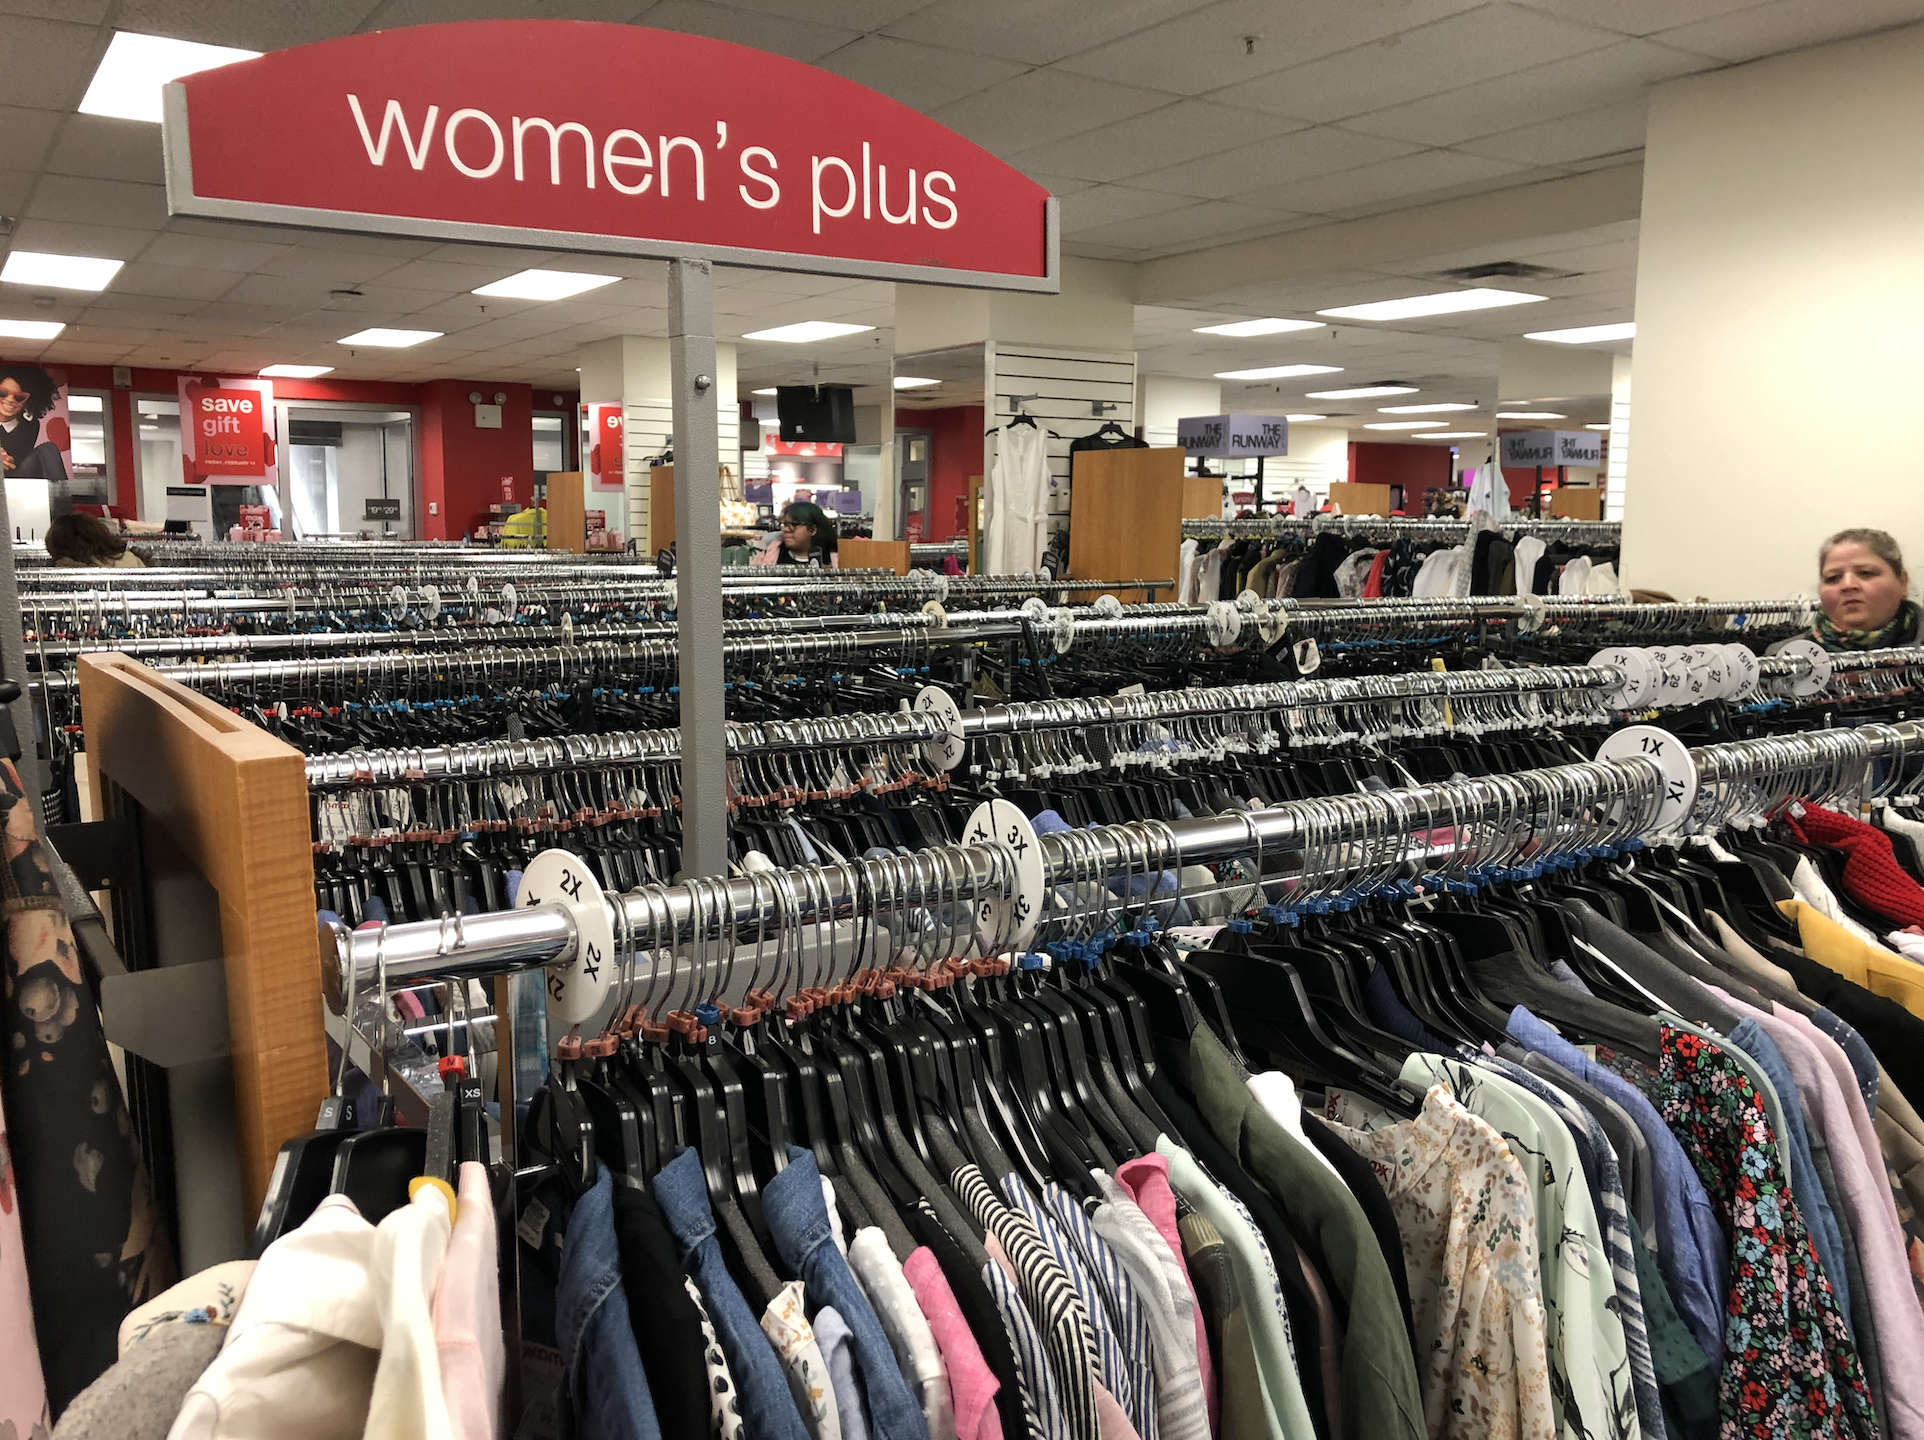 Phenomenal Access to Other Brands' Wares is Helping T.J. Maxx's